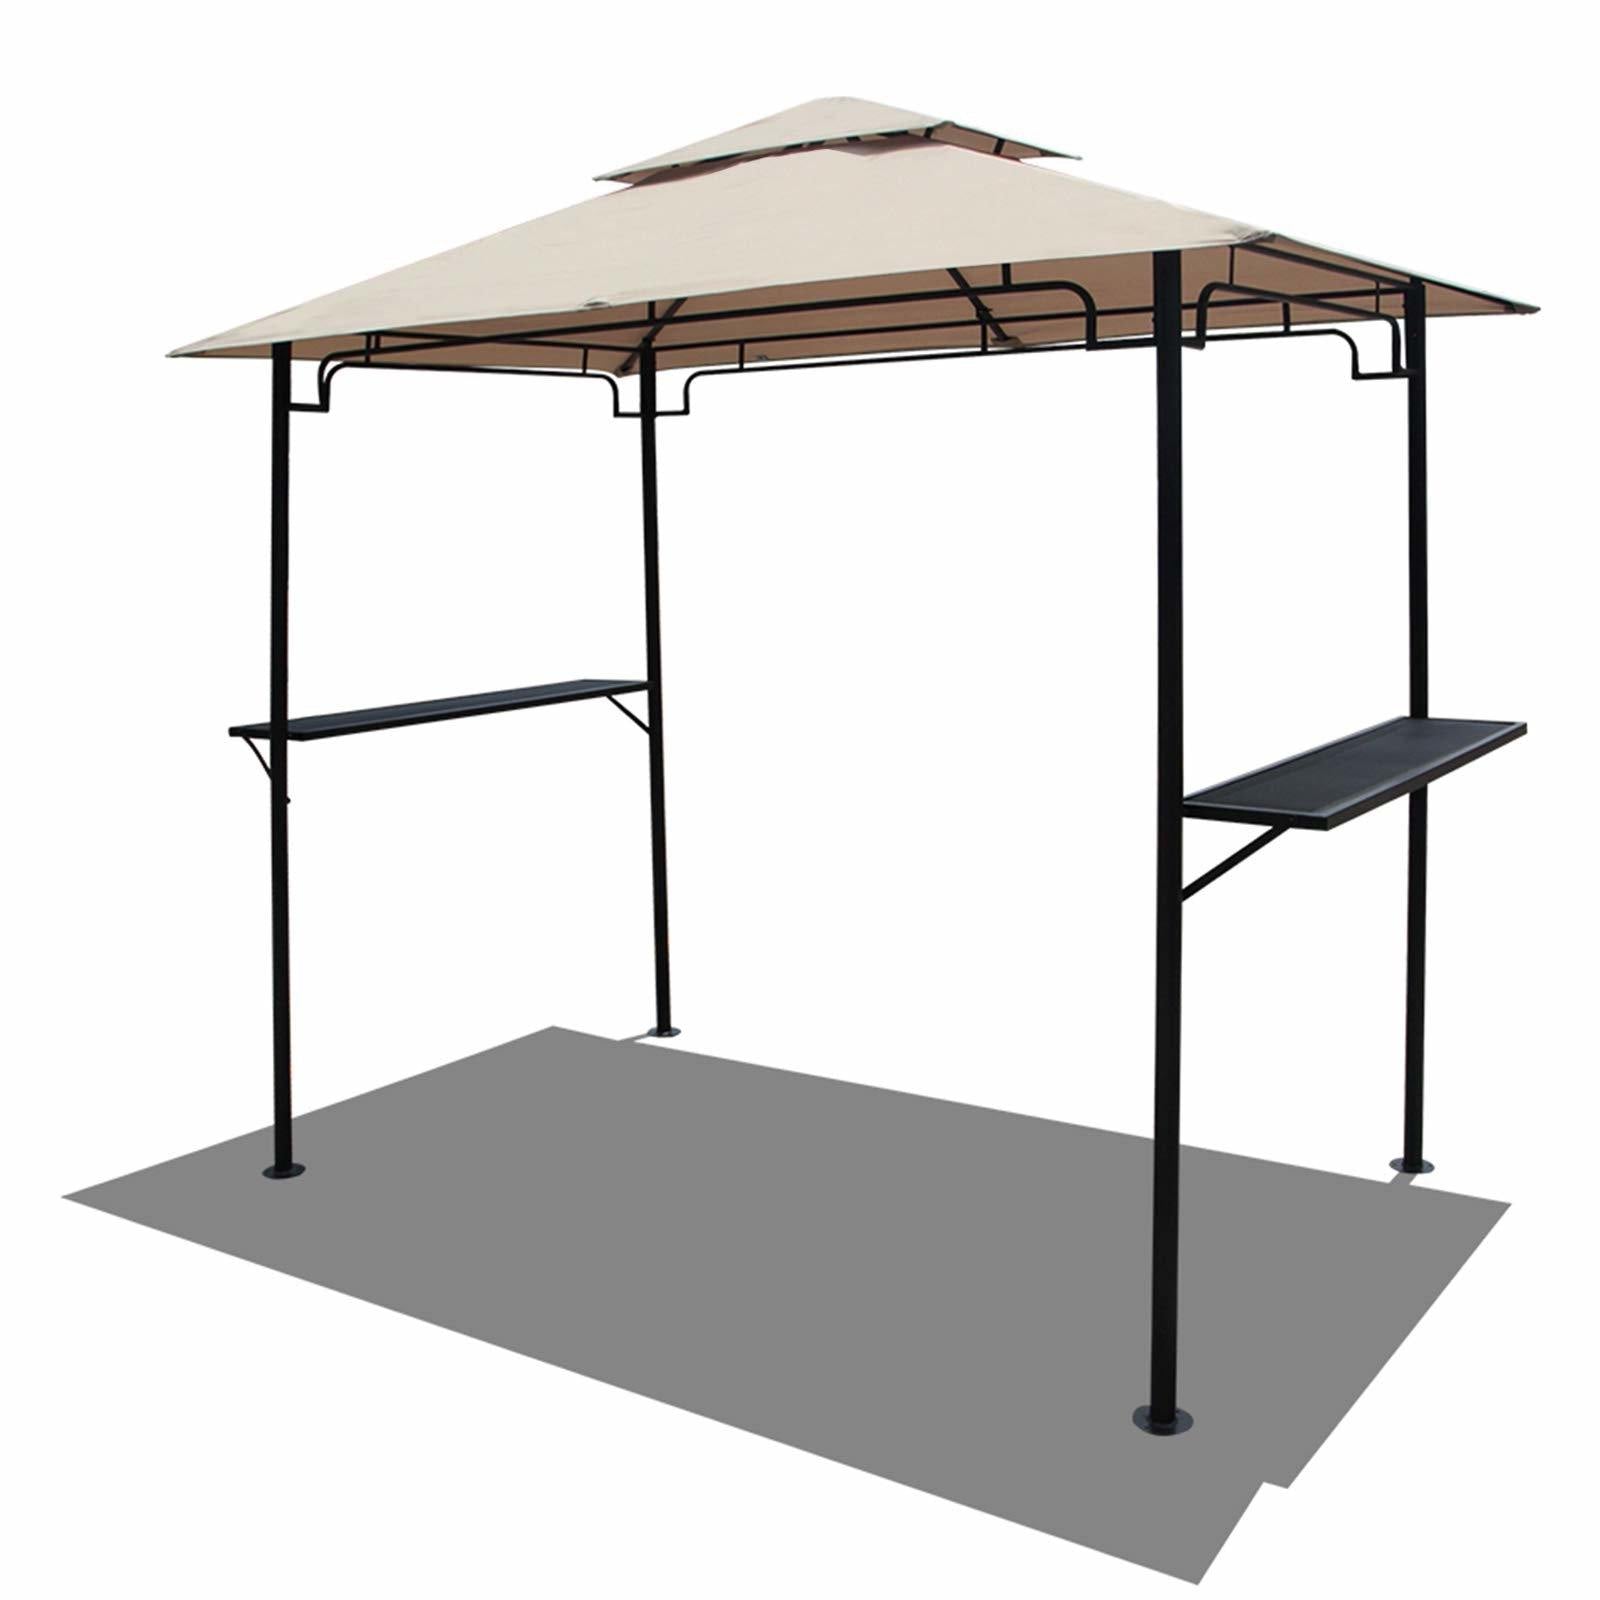 Parpicu Grill Gazebo with Double-Tier Soft Top and Metal Shelves, 8’by 5’, Beige sale - OrangeCasual